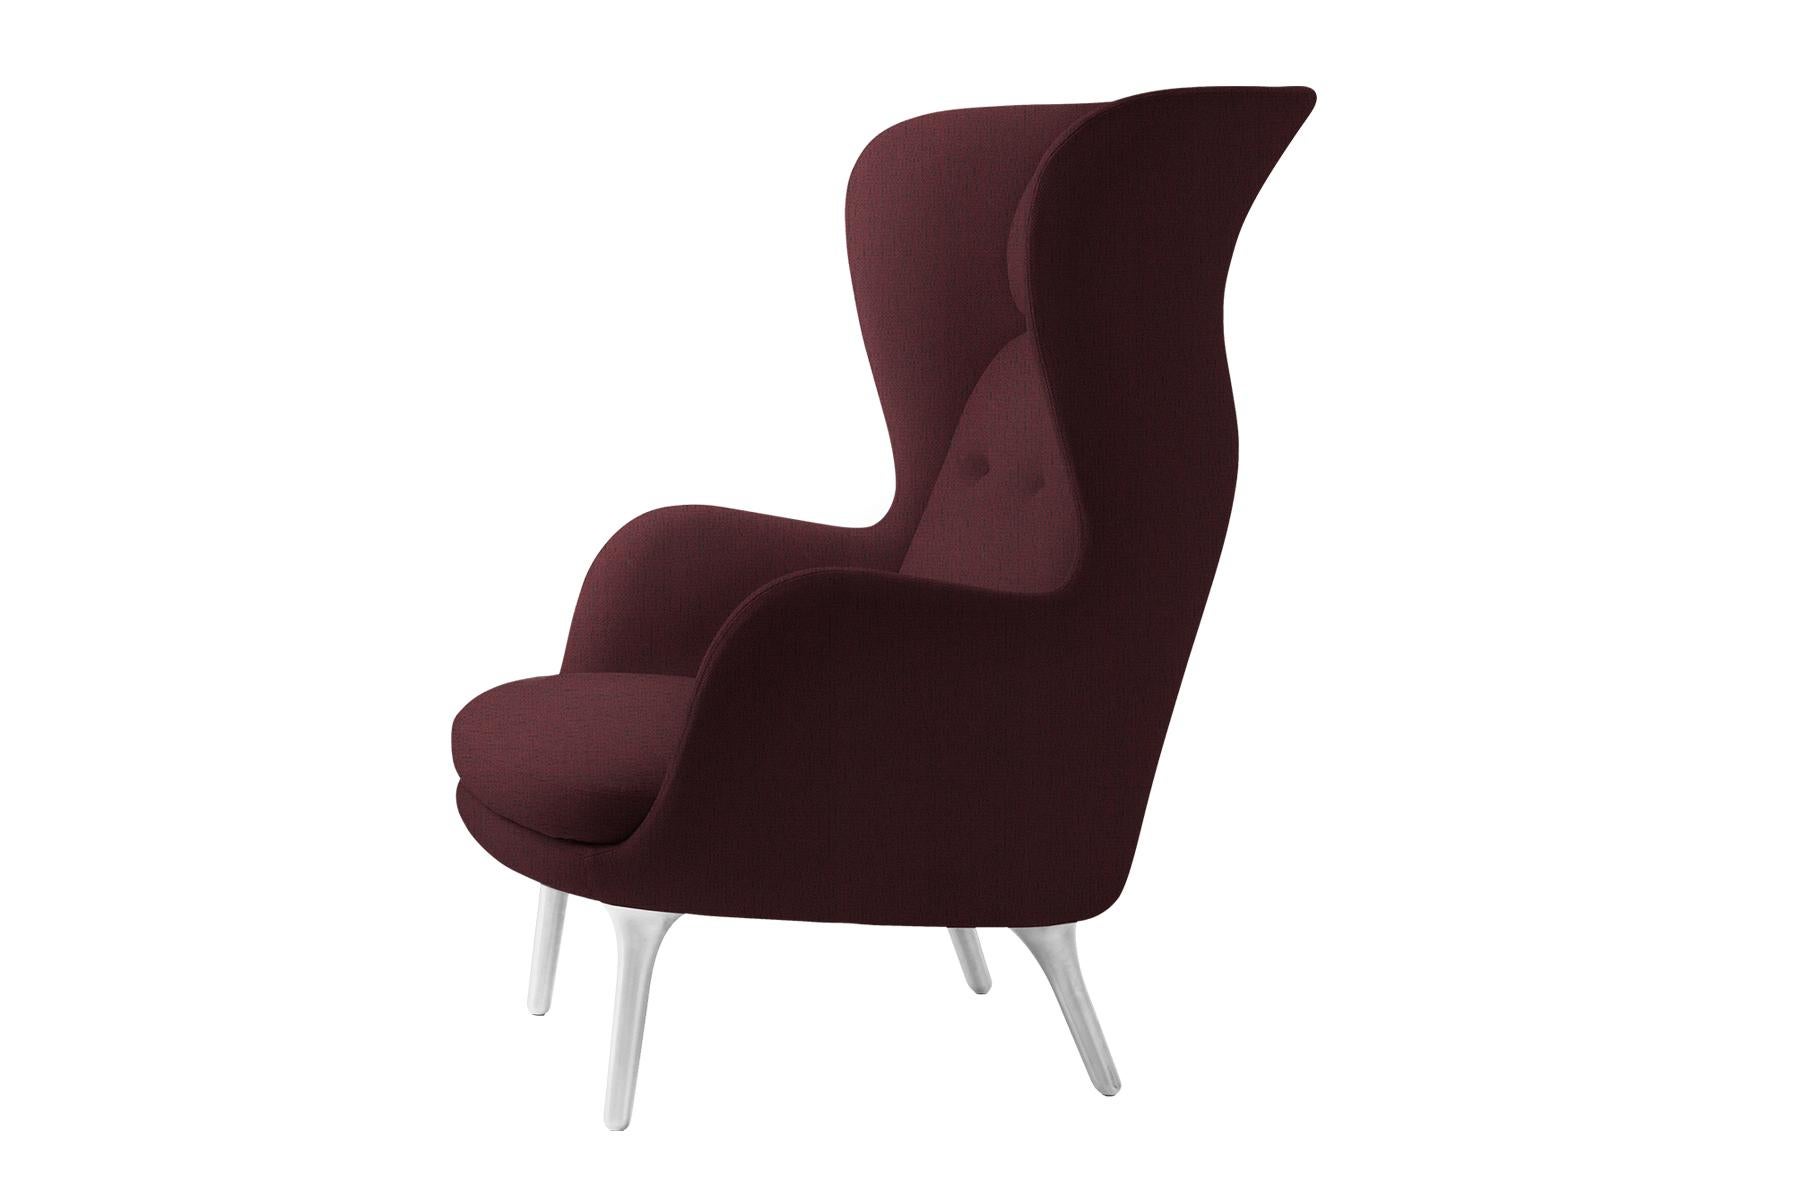 Contemporary Jaime Hayon Model Jh1 Ro Lounge Chair For Sale